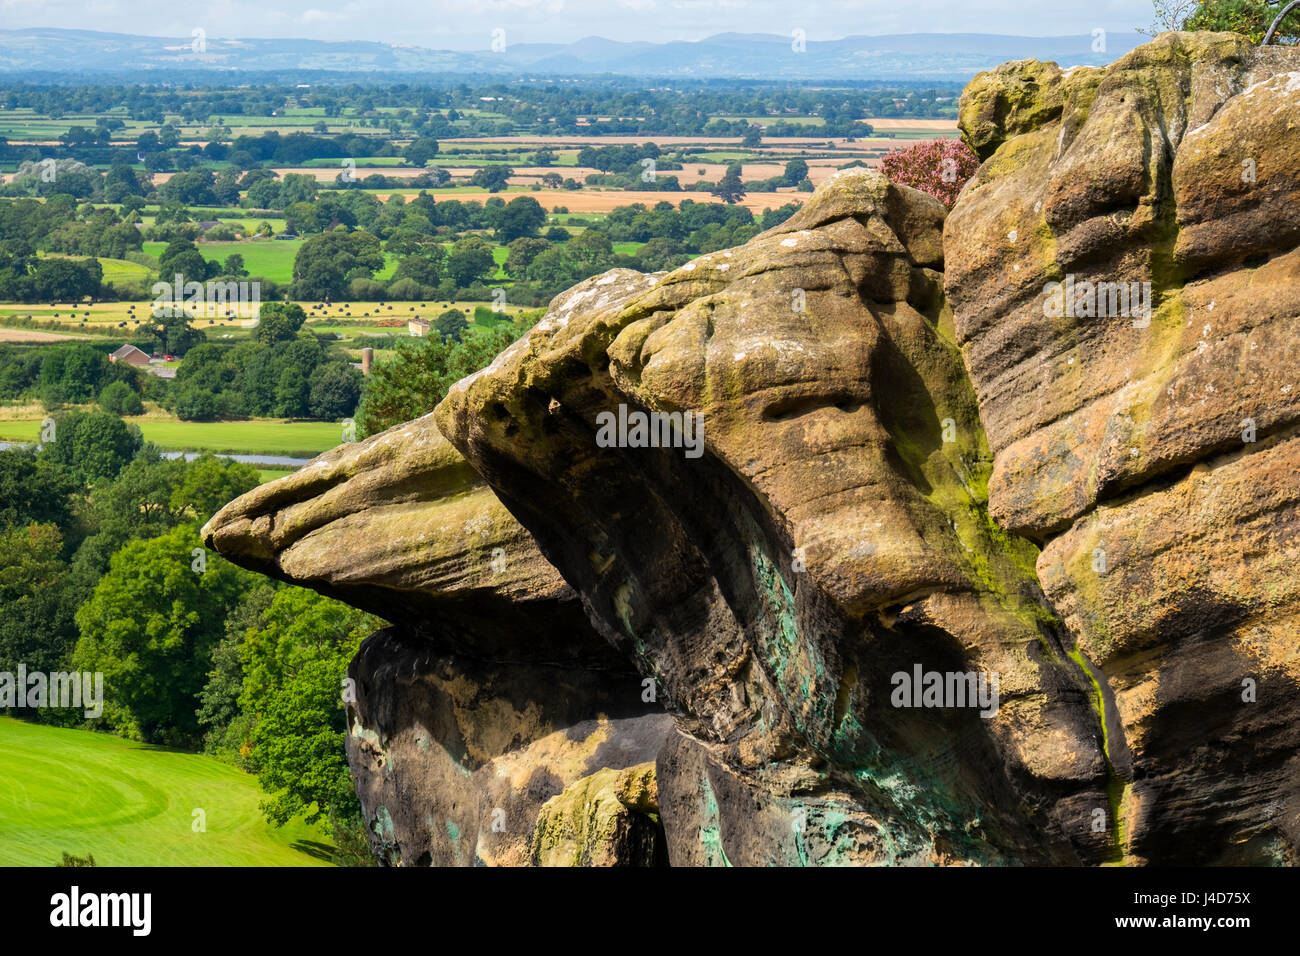 Sandstone outcrop at Hawkstone Park Follies overlooking Shropshire countryside, England, UK Stock Photo